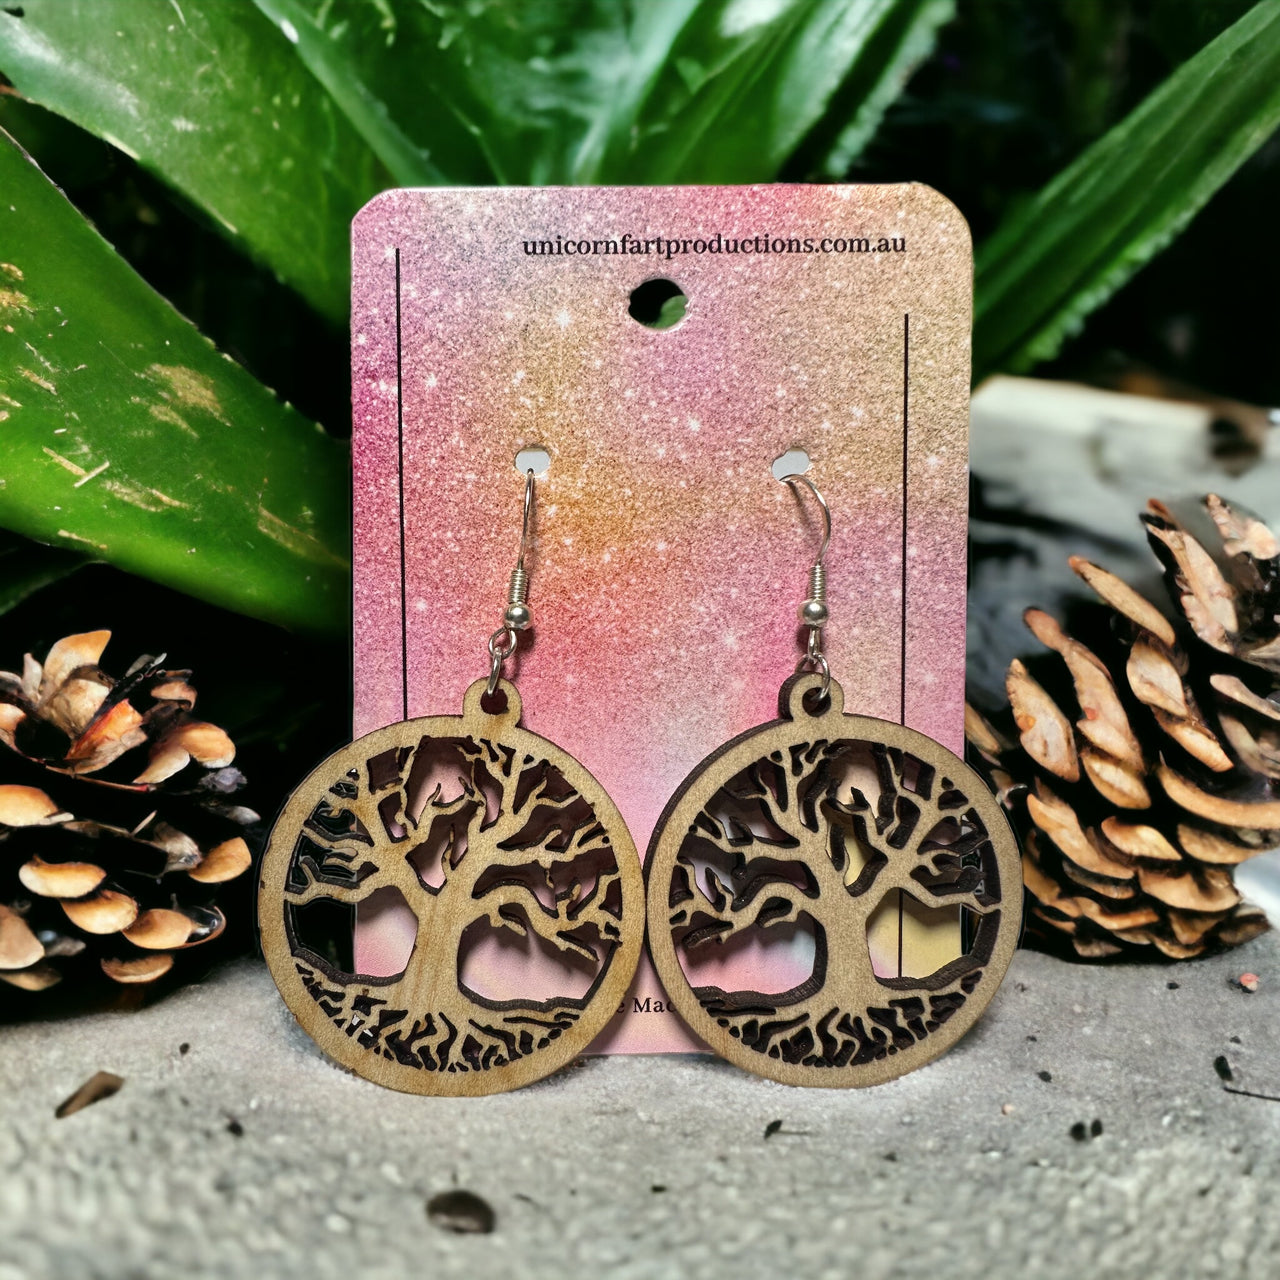 Wooden Handmade earrings crafted from sustainable timber - Trees 2